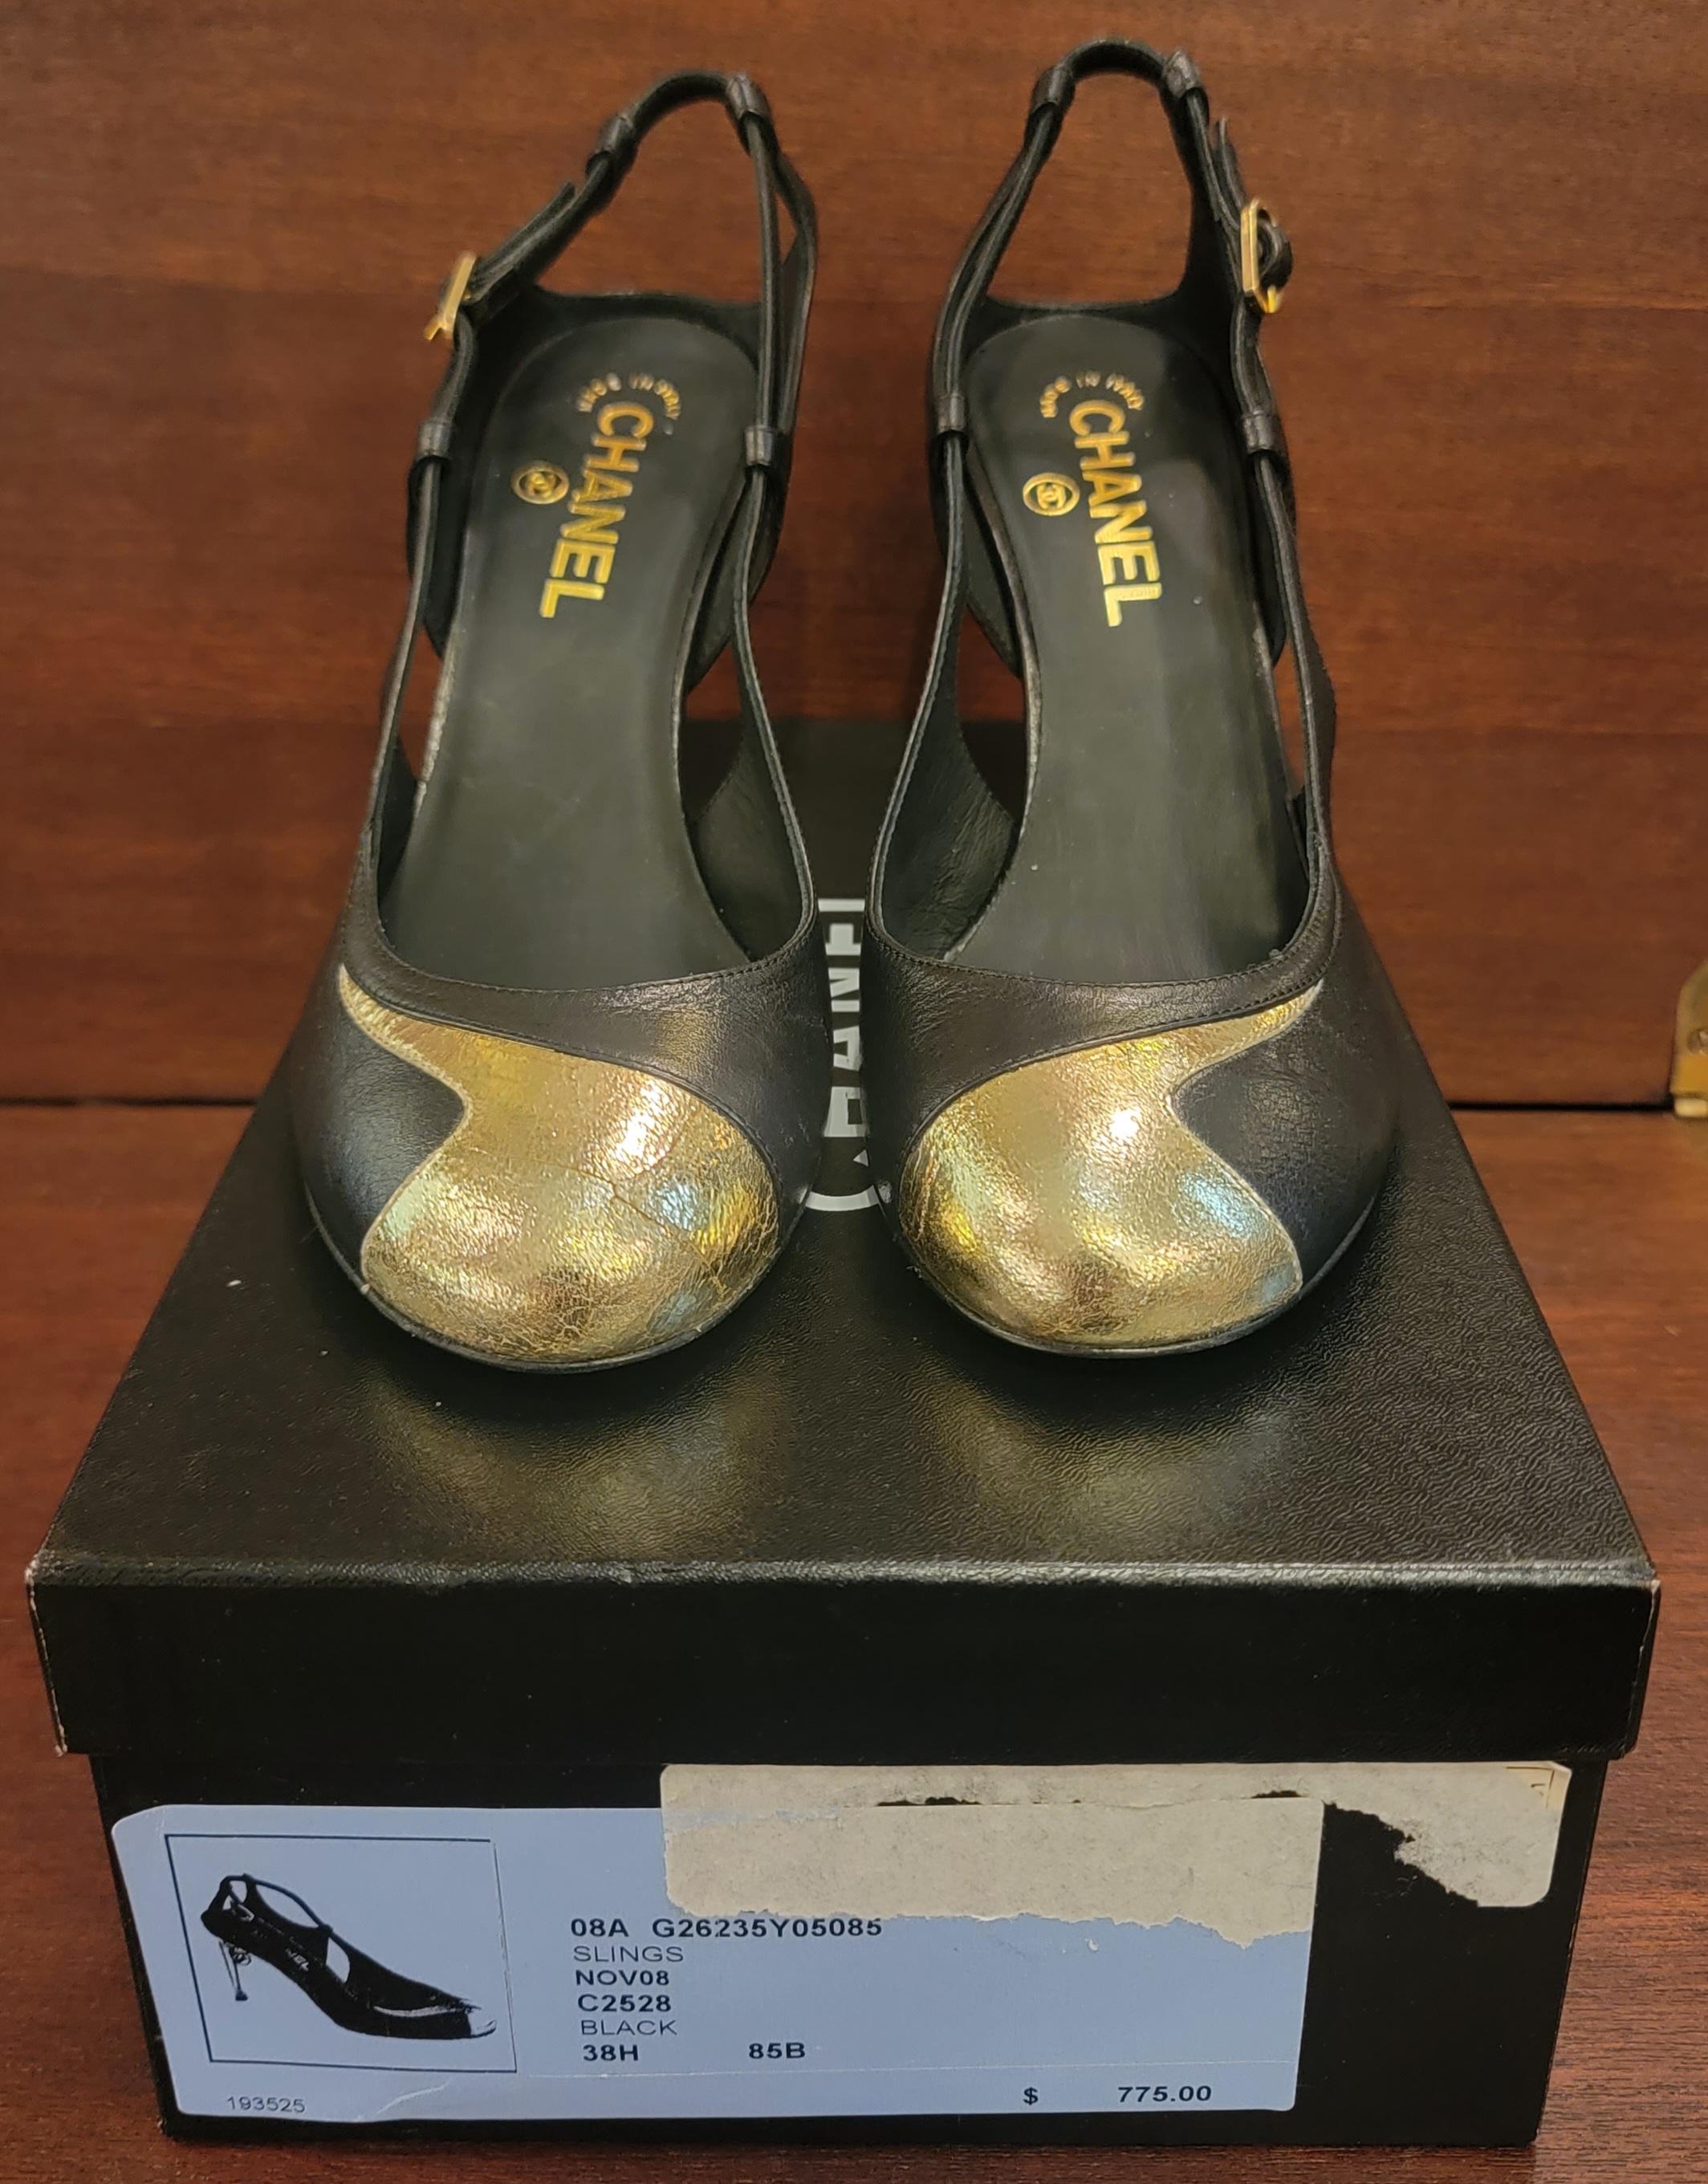 Brand new Rare classic Chanel Size 38.5 High Heel Shoes Gold Accents. The sole of the heels is a gold tone, the heels have a ball accent with the double CC on them. The shoe is made from black leather. 
